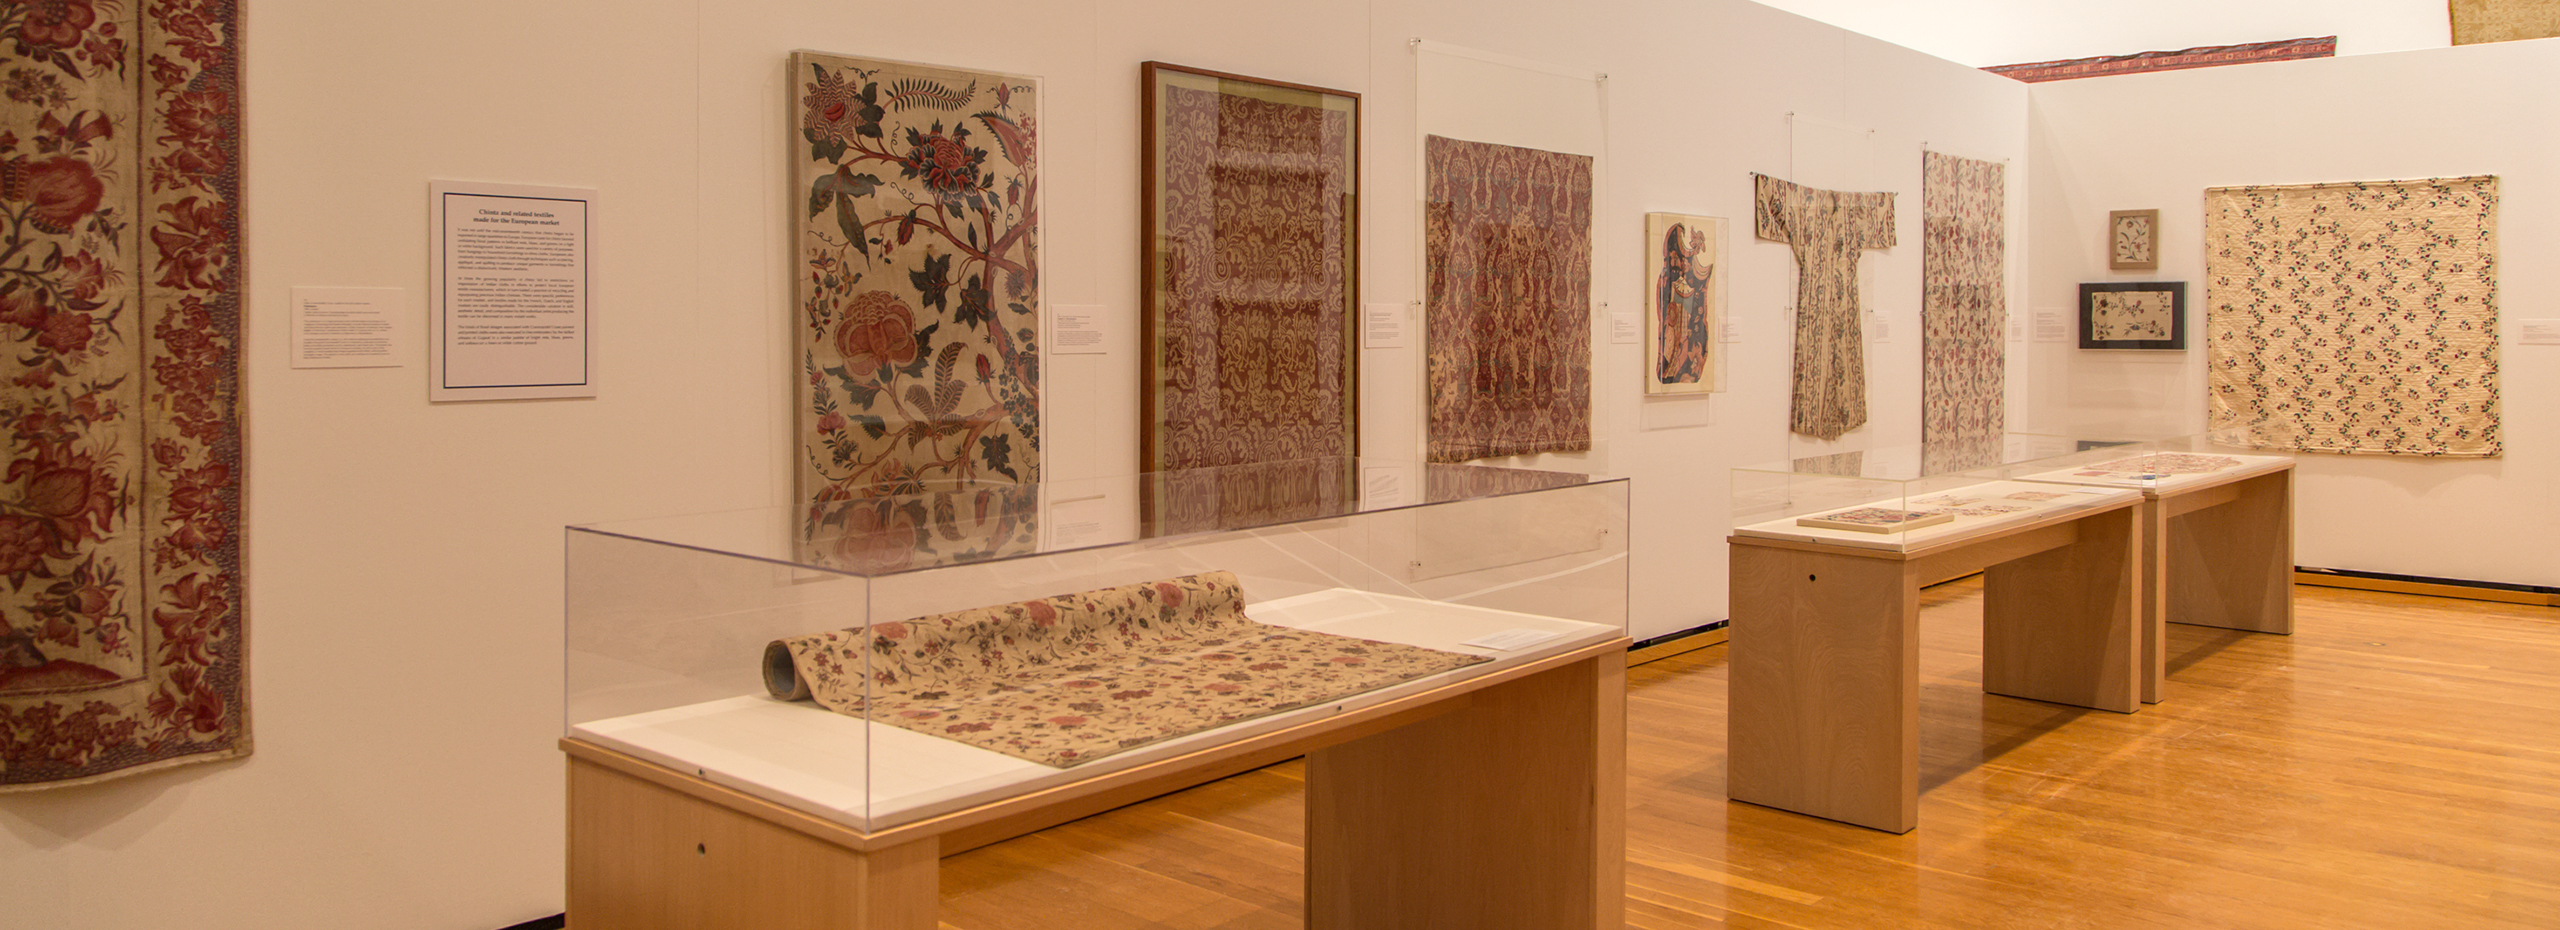 Colorful textiles of different shapes hang on gallery walls and are displayed in cases